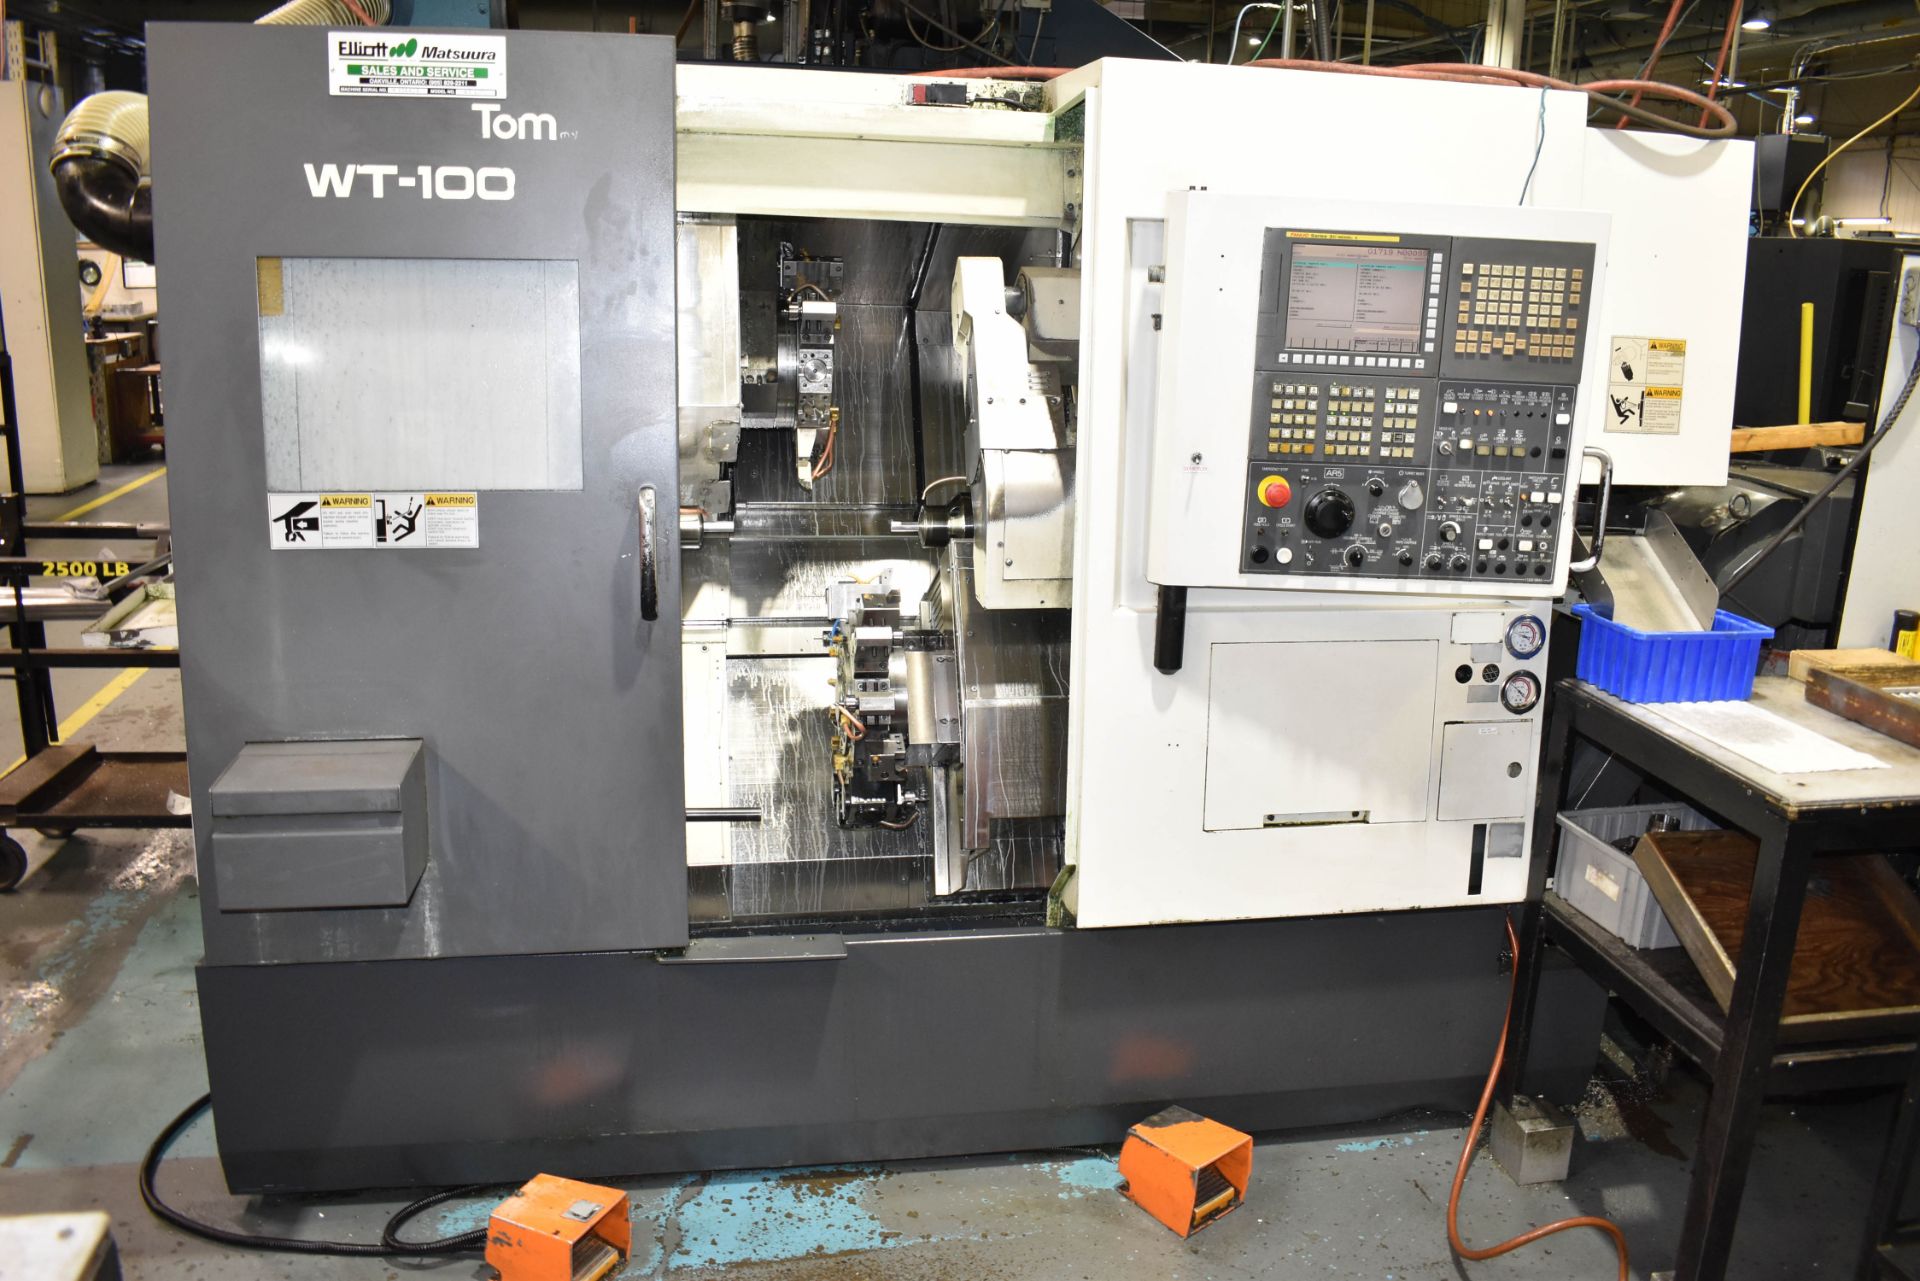 NAKAMURA-TOME (2005) WT-100 MMYS MULTI-AXIS OPPOSED SPINDLE AND TWIN TURRET CNC MULTI-TASKING CENTER